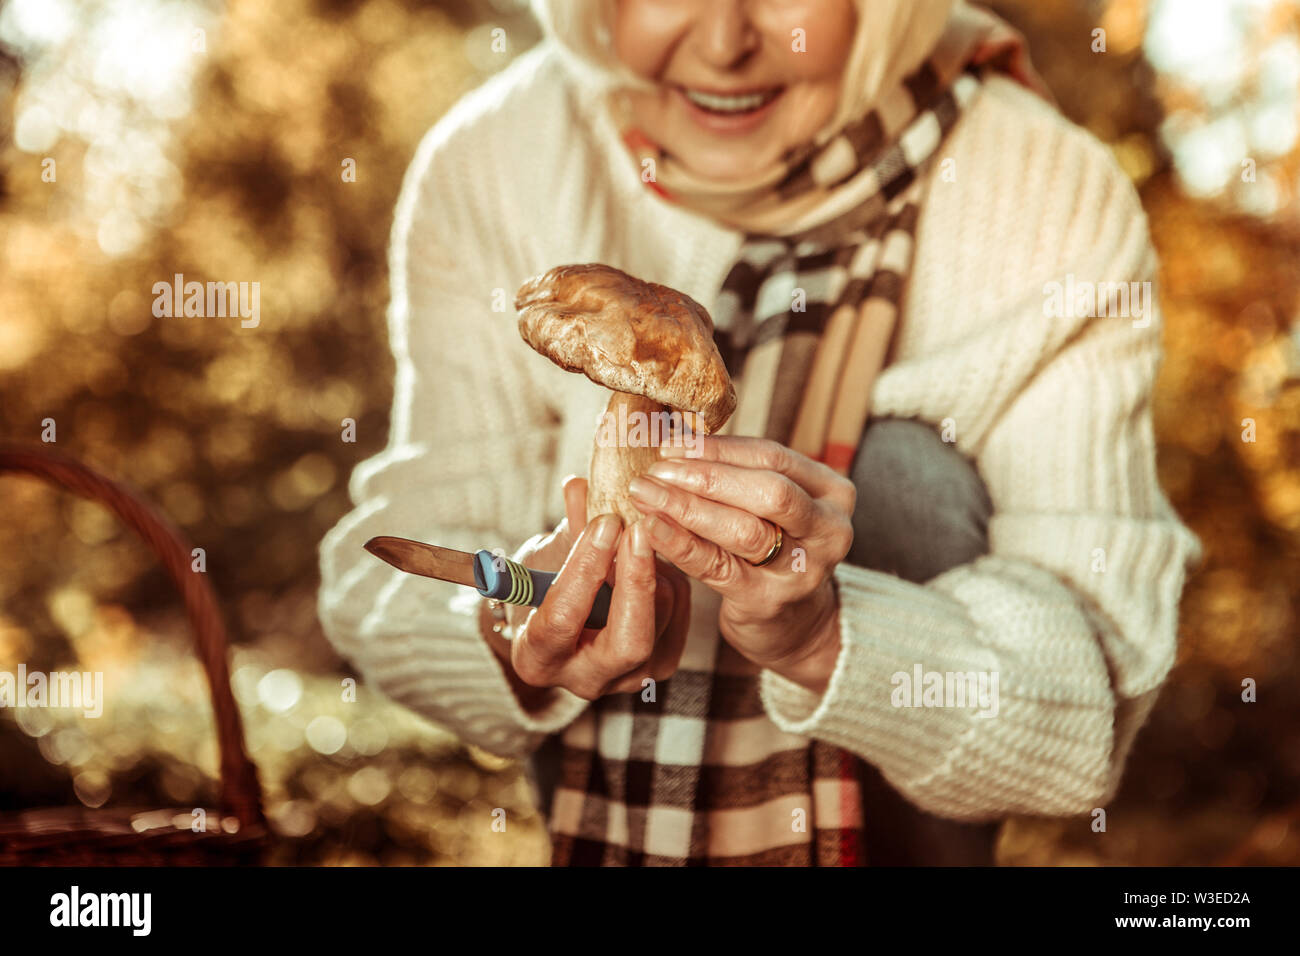 Big wild mushroom in the hands of a woman. Stock Photo